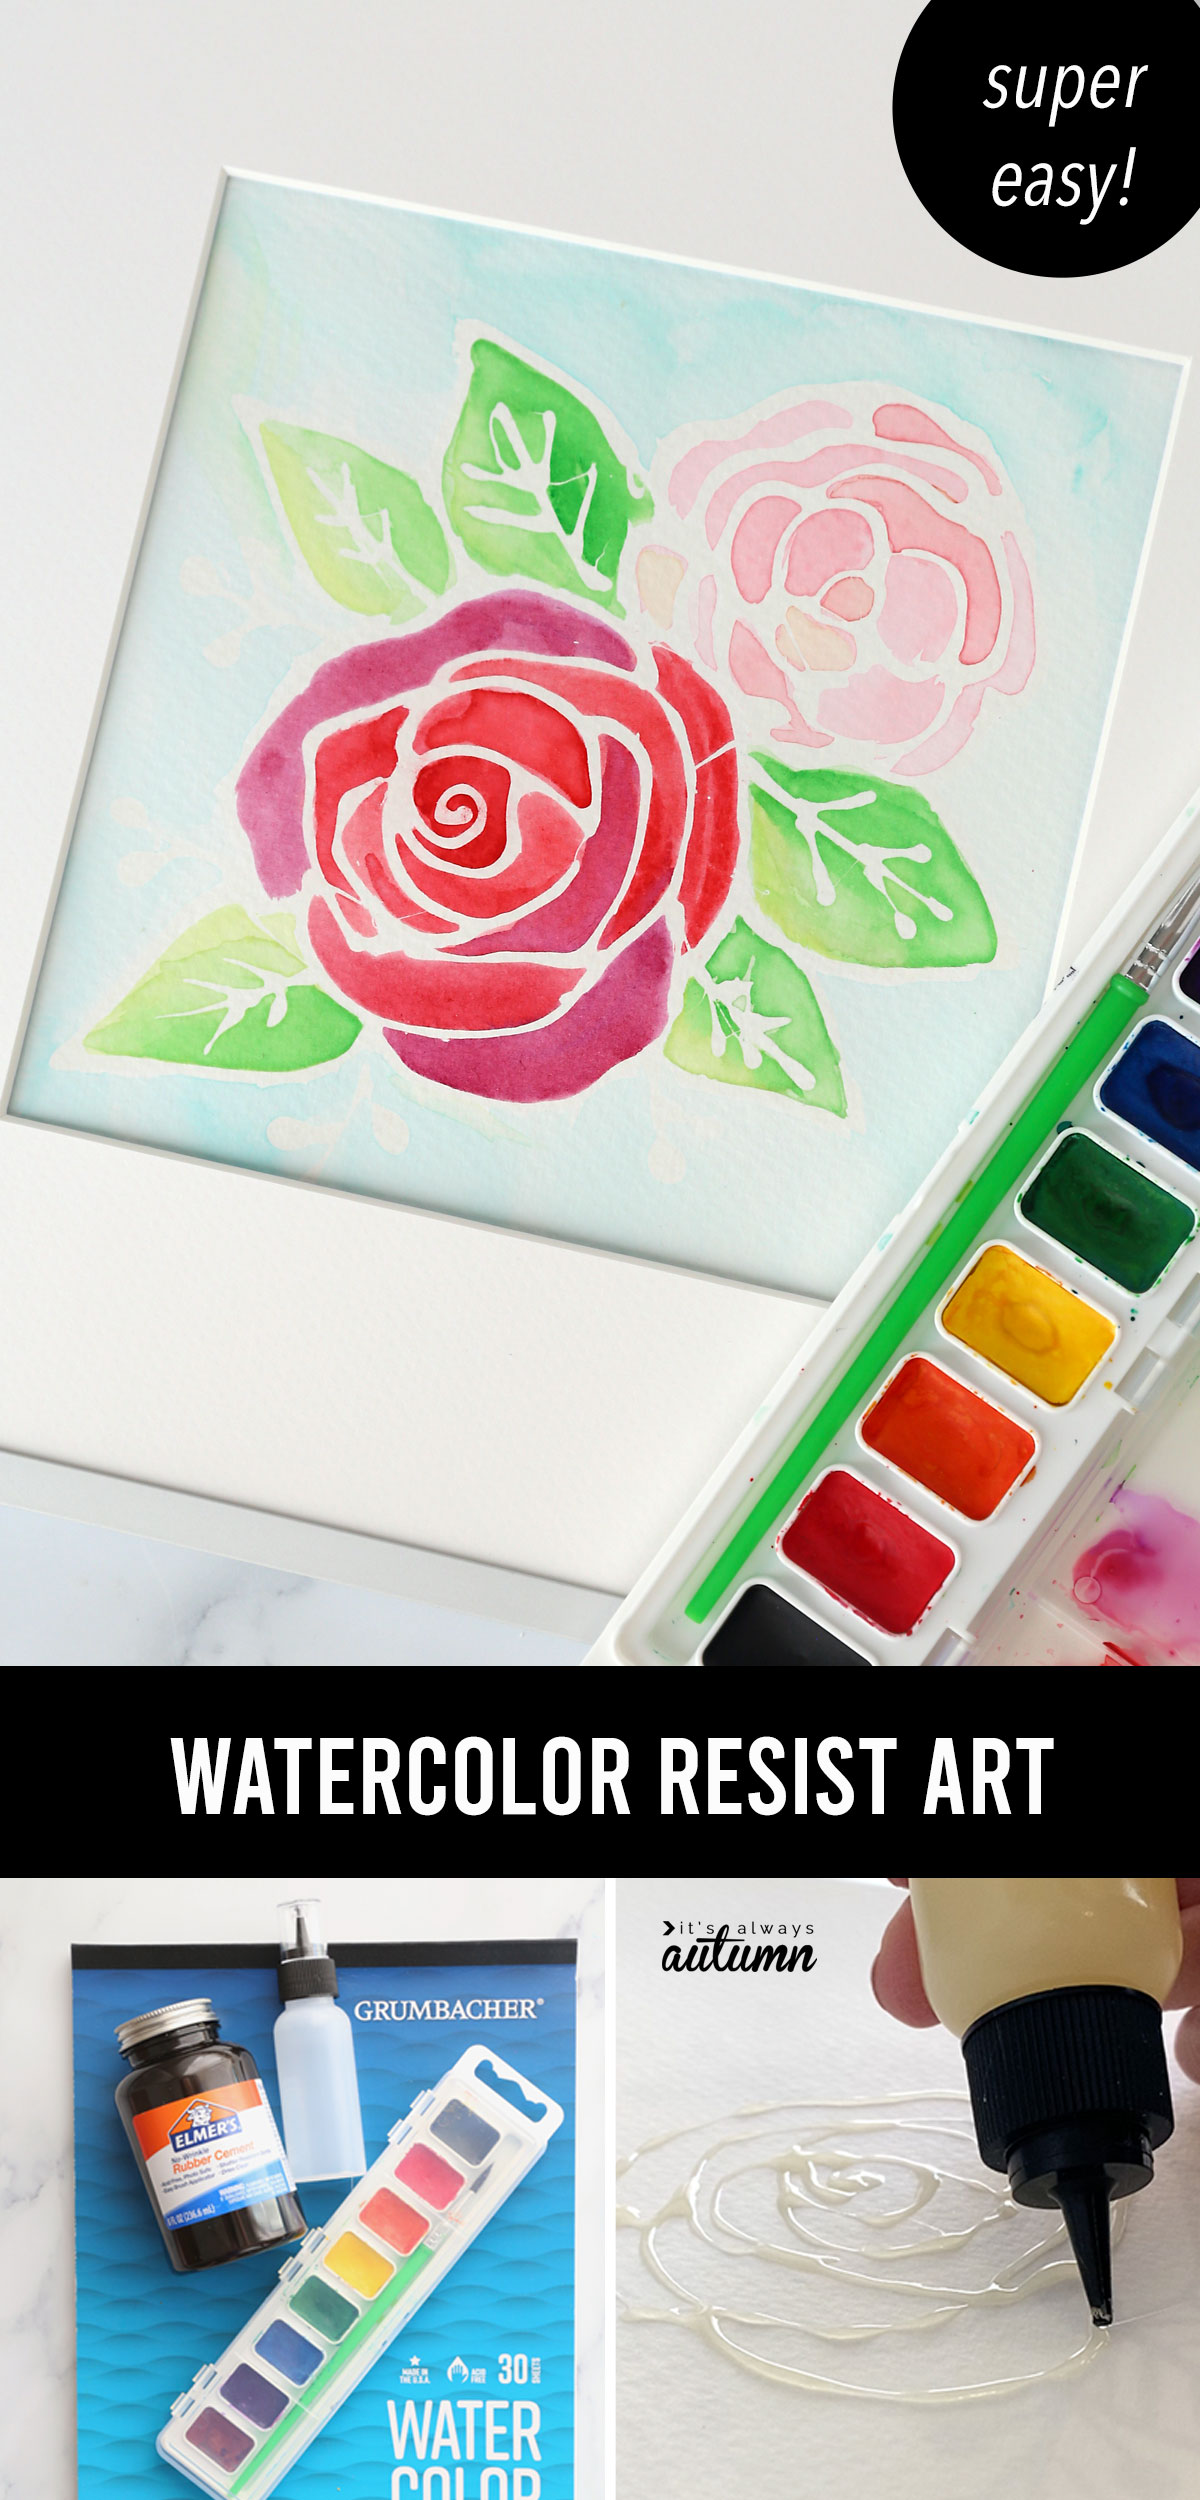 Floral watercolor painting with text: watercolor resist art, super easy!